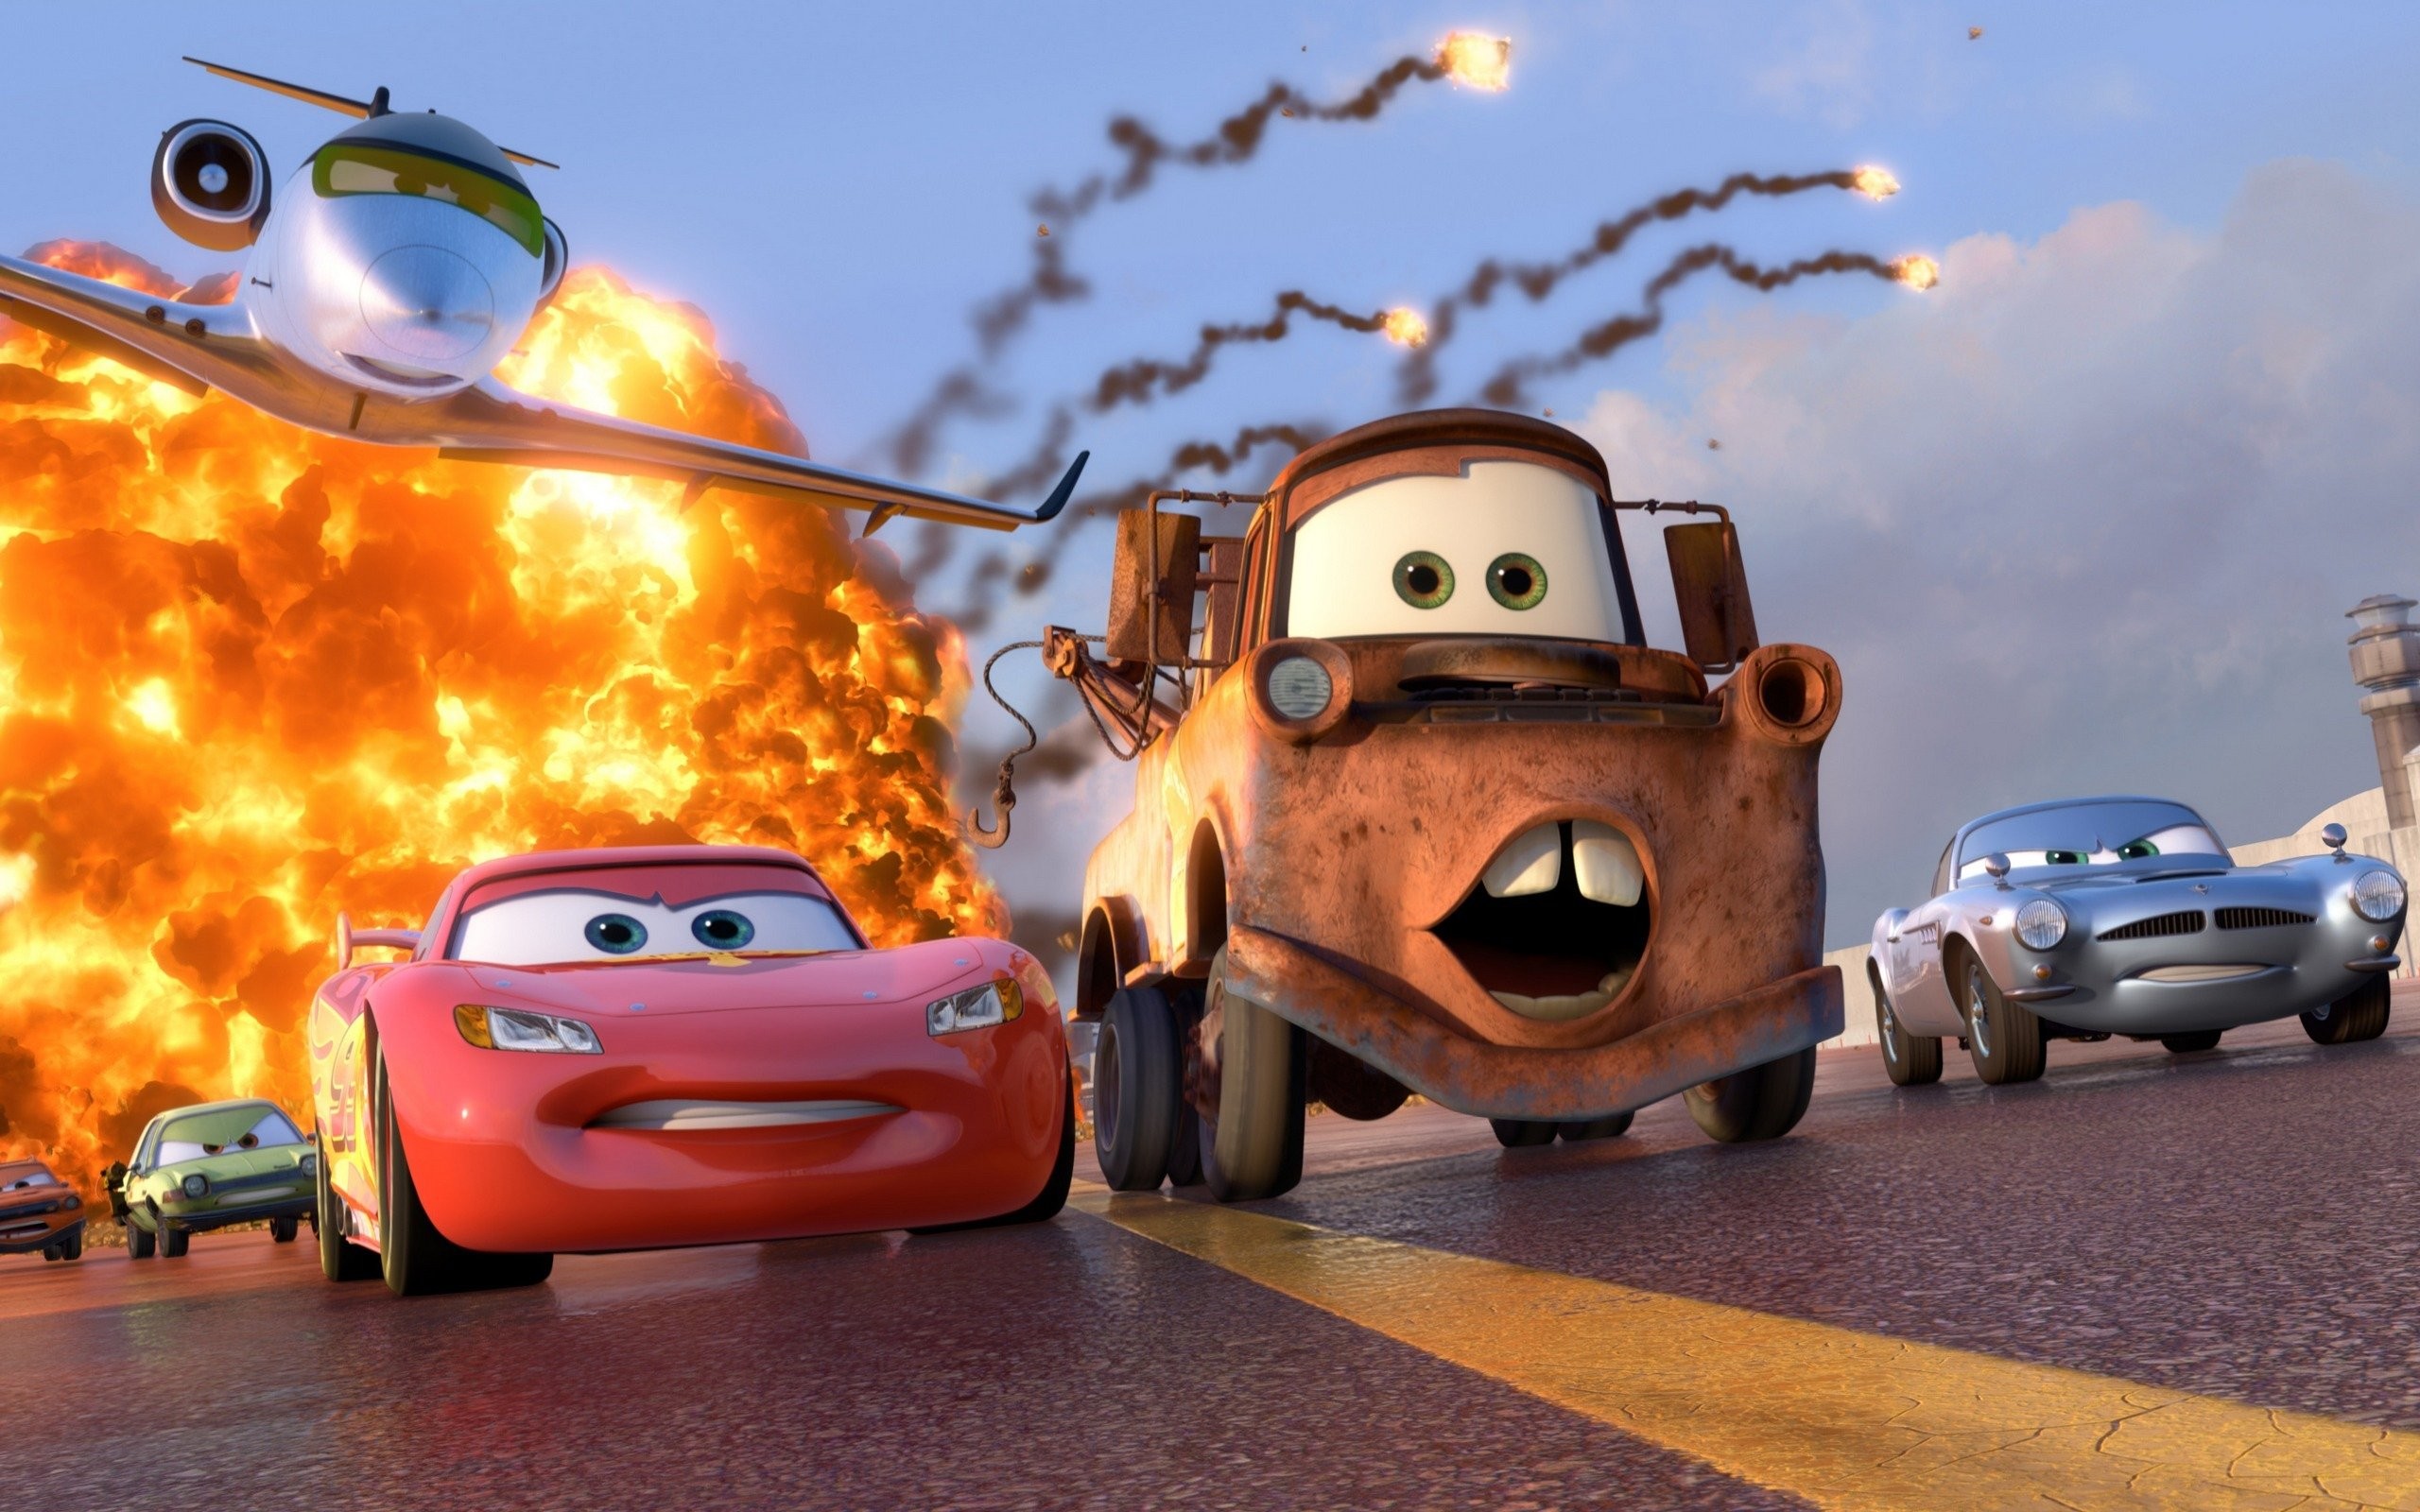 2560x1600 Lightning Mcqueen And Mater Wallpaper Animated Cars Disney Film